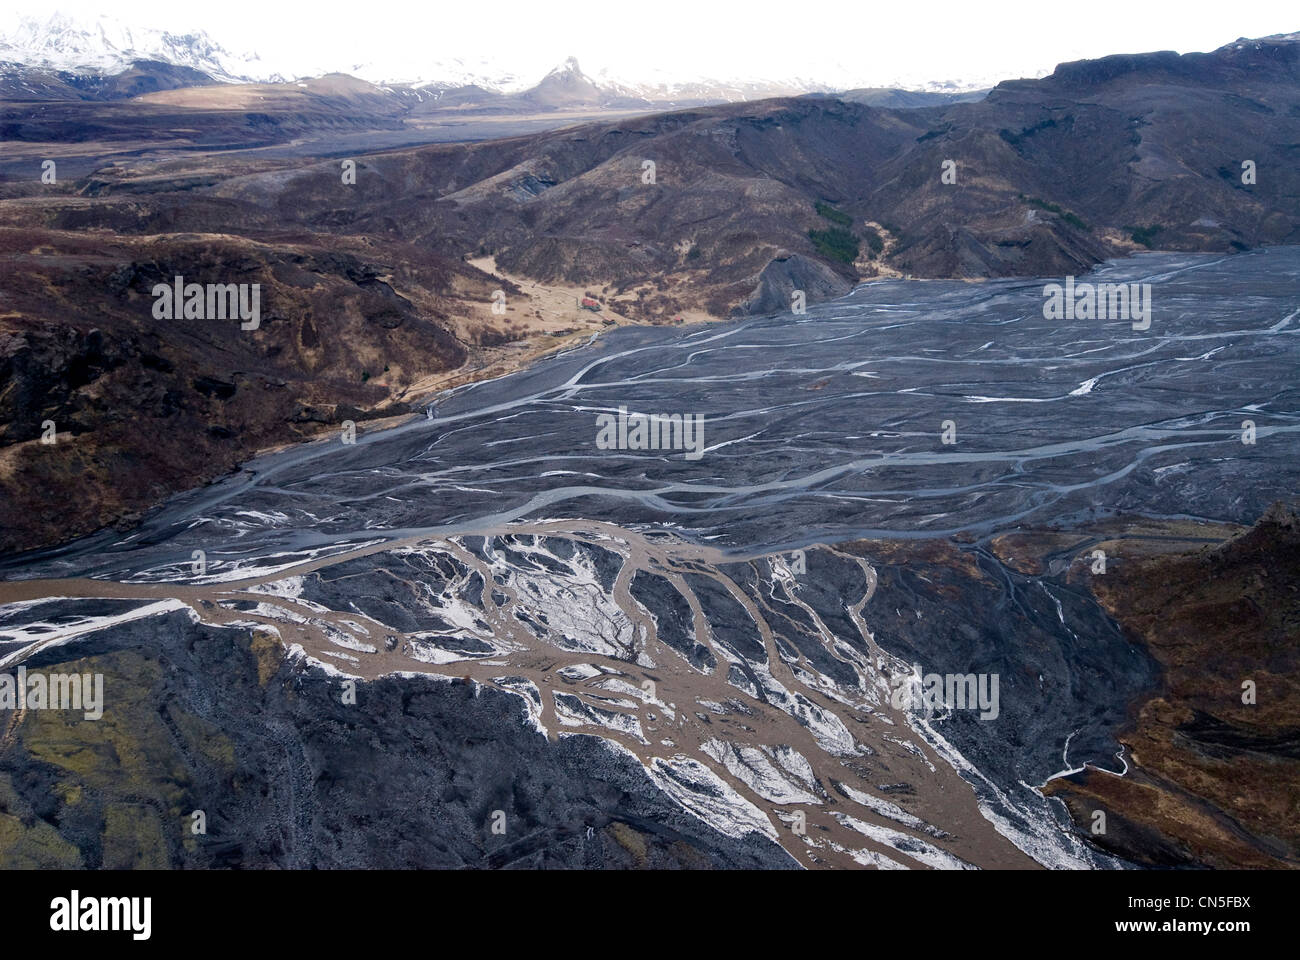 Iceland, Sudurland Region, river filled with ashes during the volcanic eruption of Fimmvorduhals in March 2010 (aerial view) Stock Photo